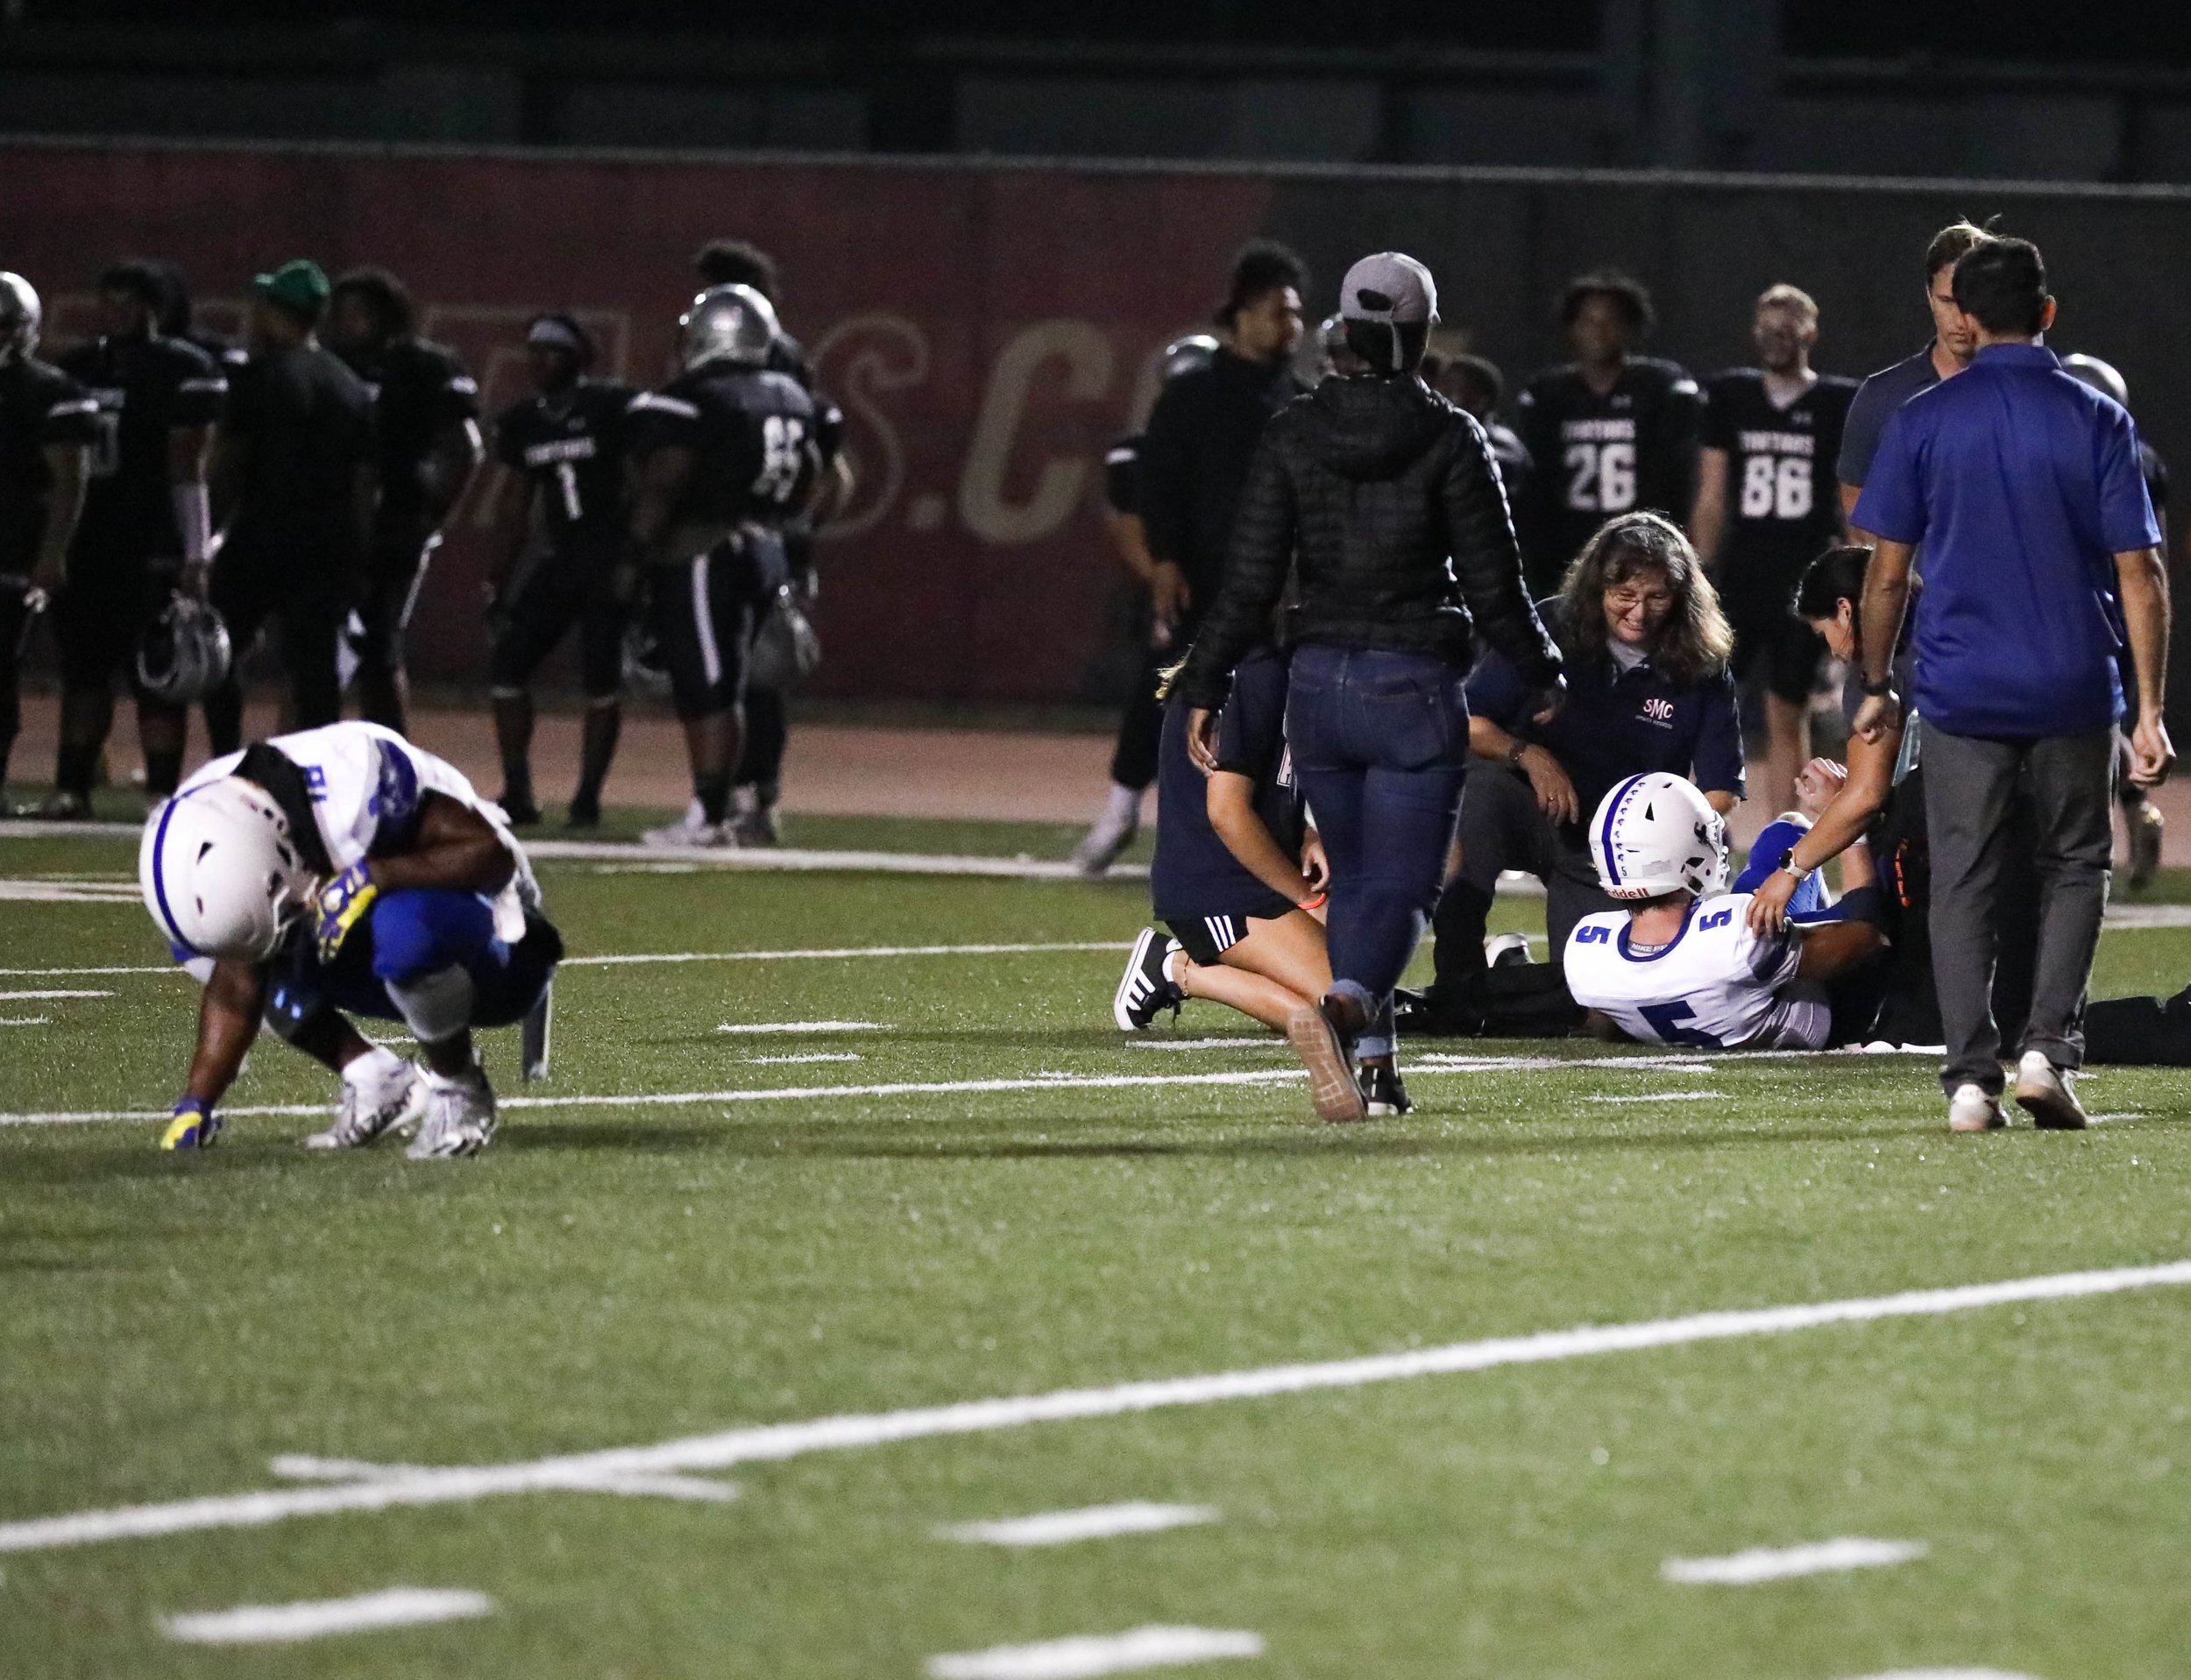  Santa Monic College Wide Receiver Everson Bozeman (18, L) squatting down as Quarterback Forrest Brock (5,R) being aided up from the field by the medical team after the end of a play against the Compton College Tartars on Saturday, Sept. 17 at Compto